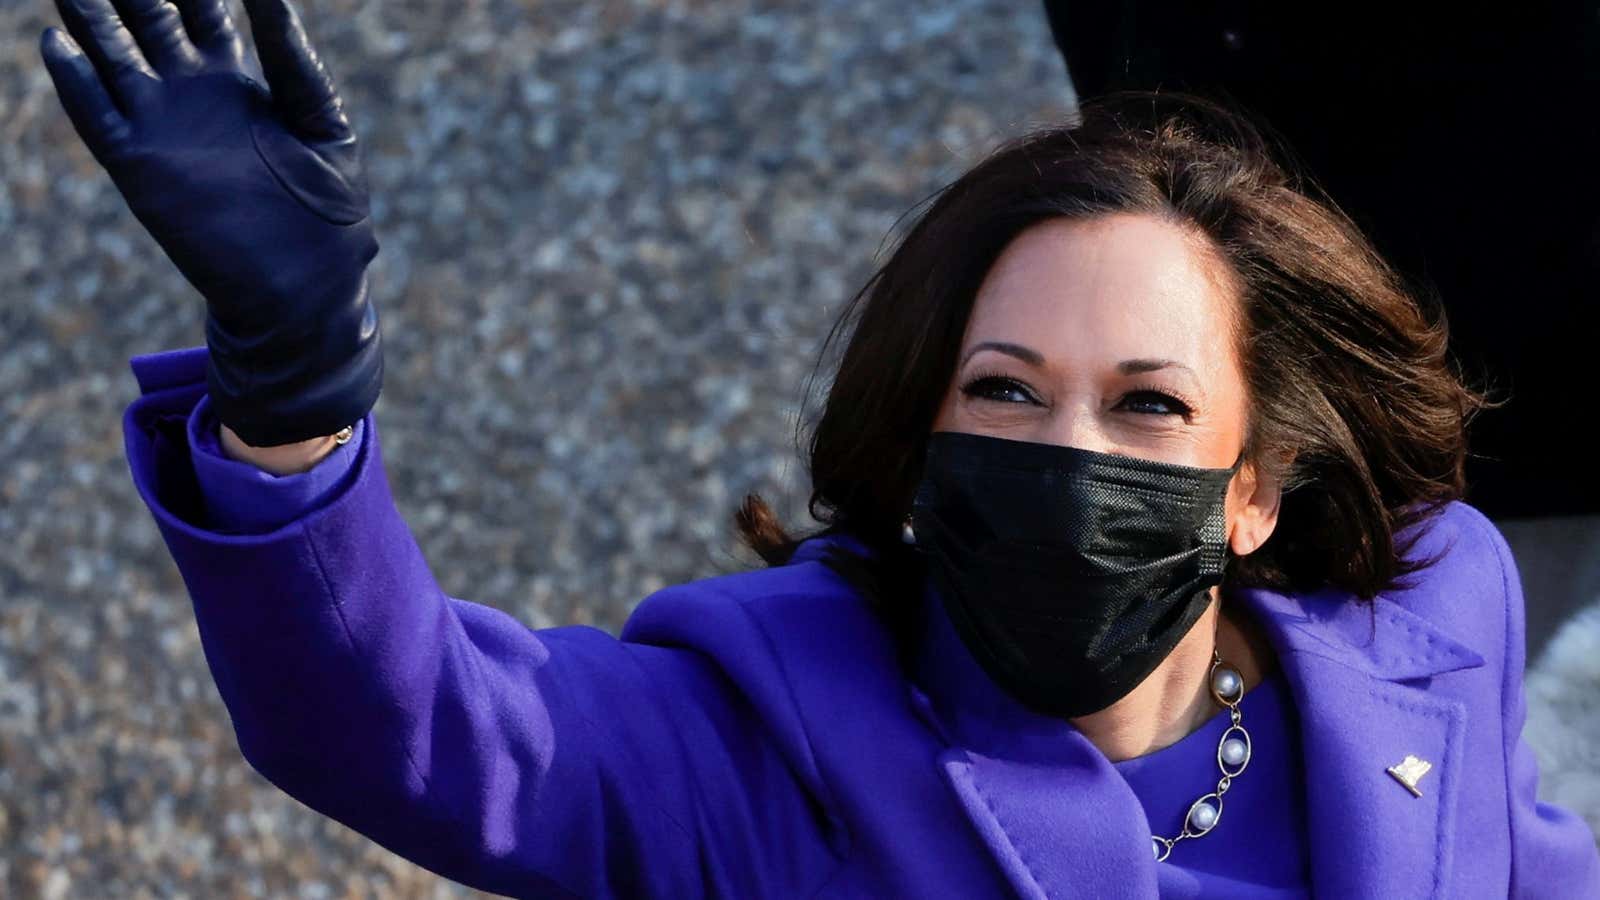 On January 20th, Kamala Harris became vice president of the US – so what’s next?